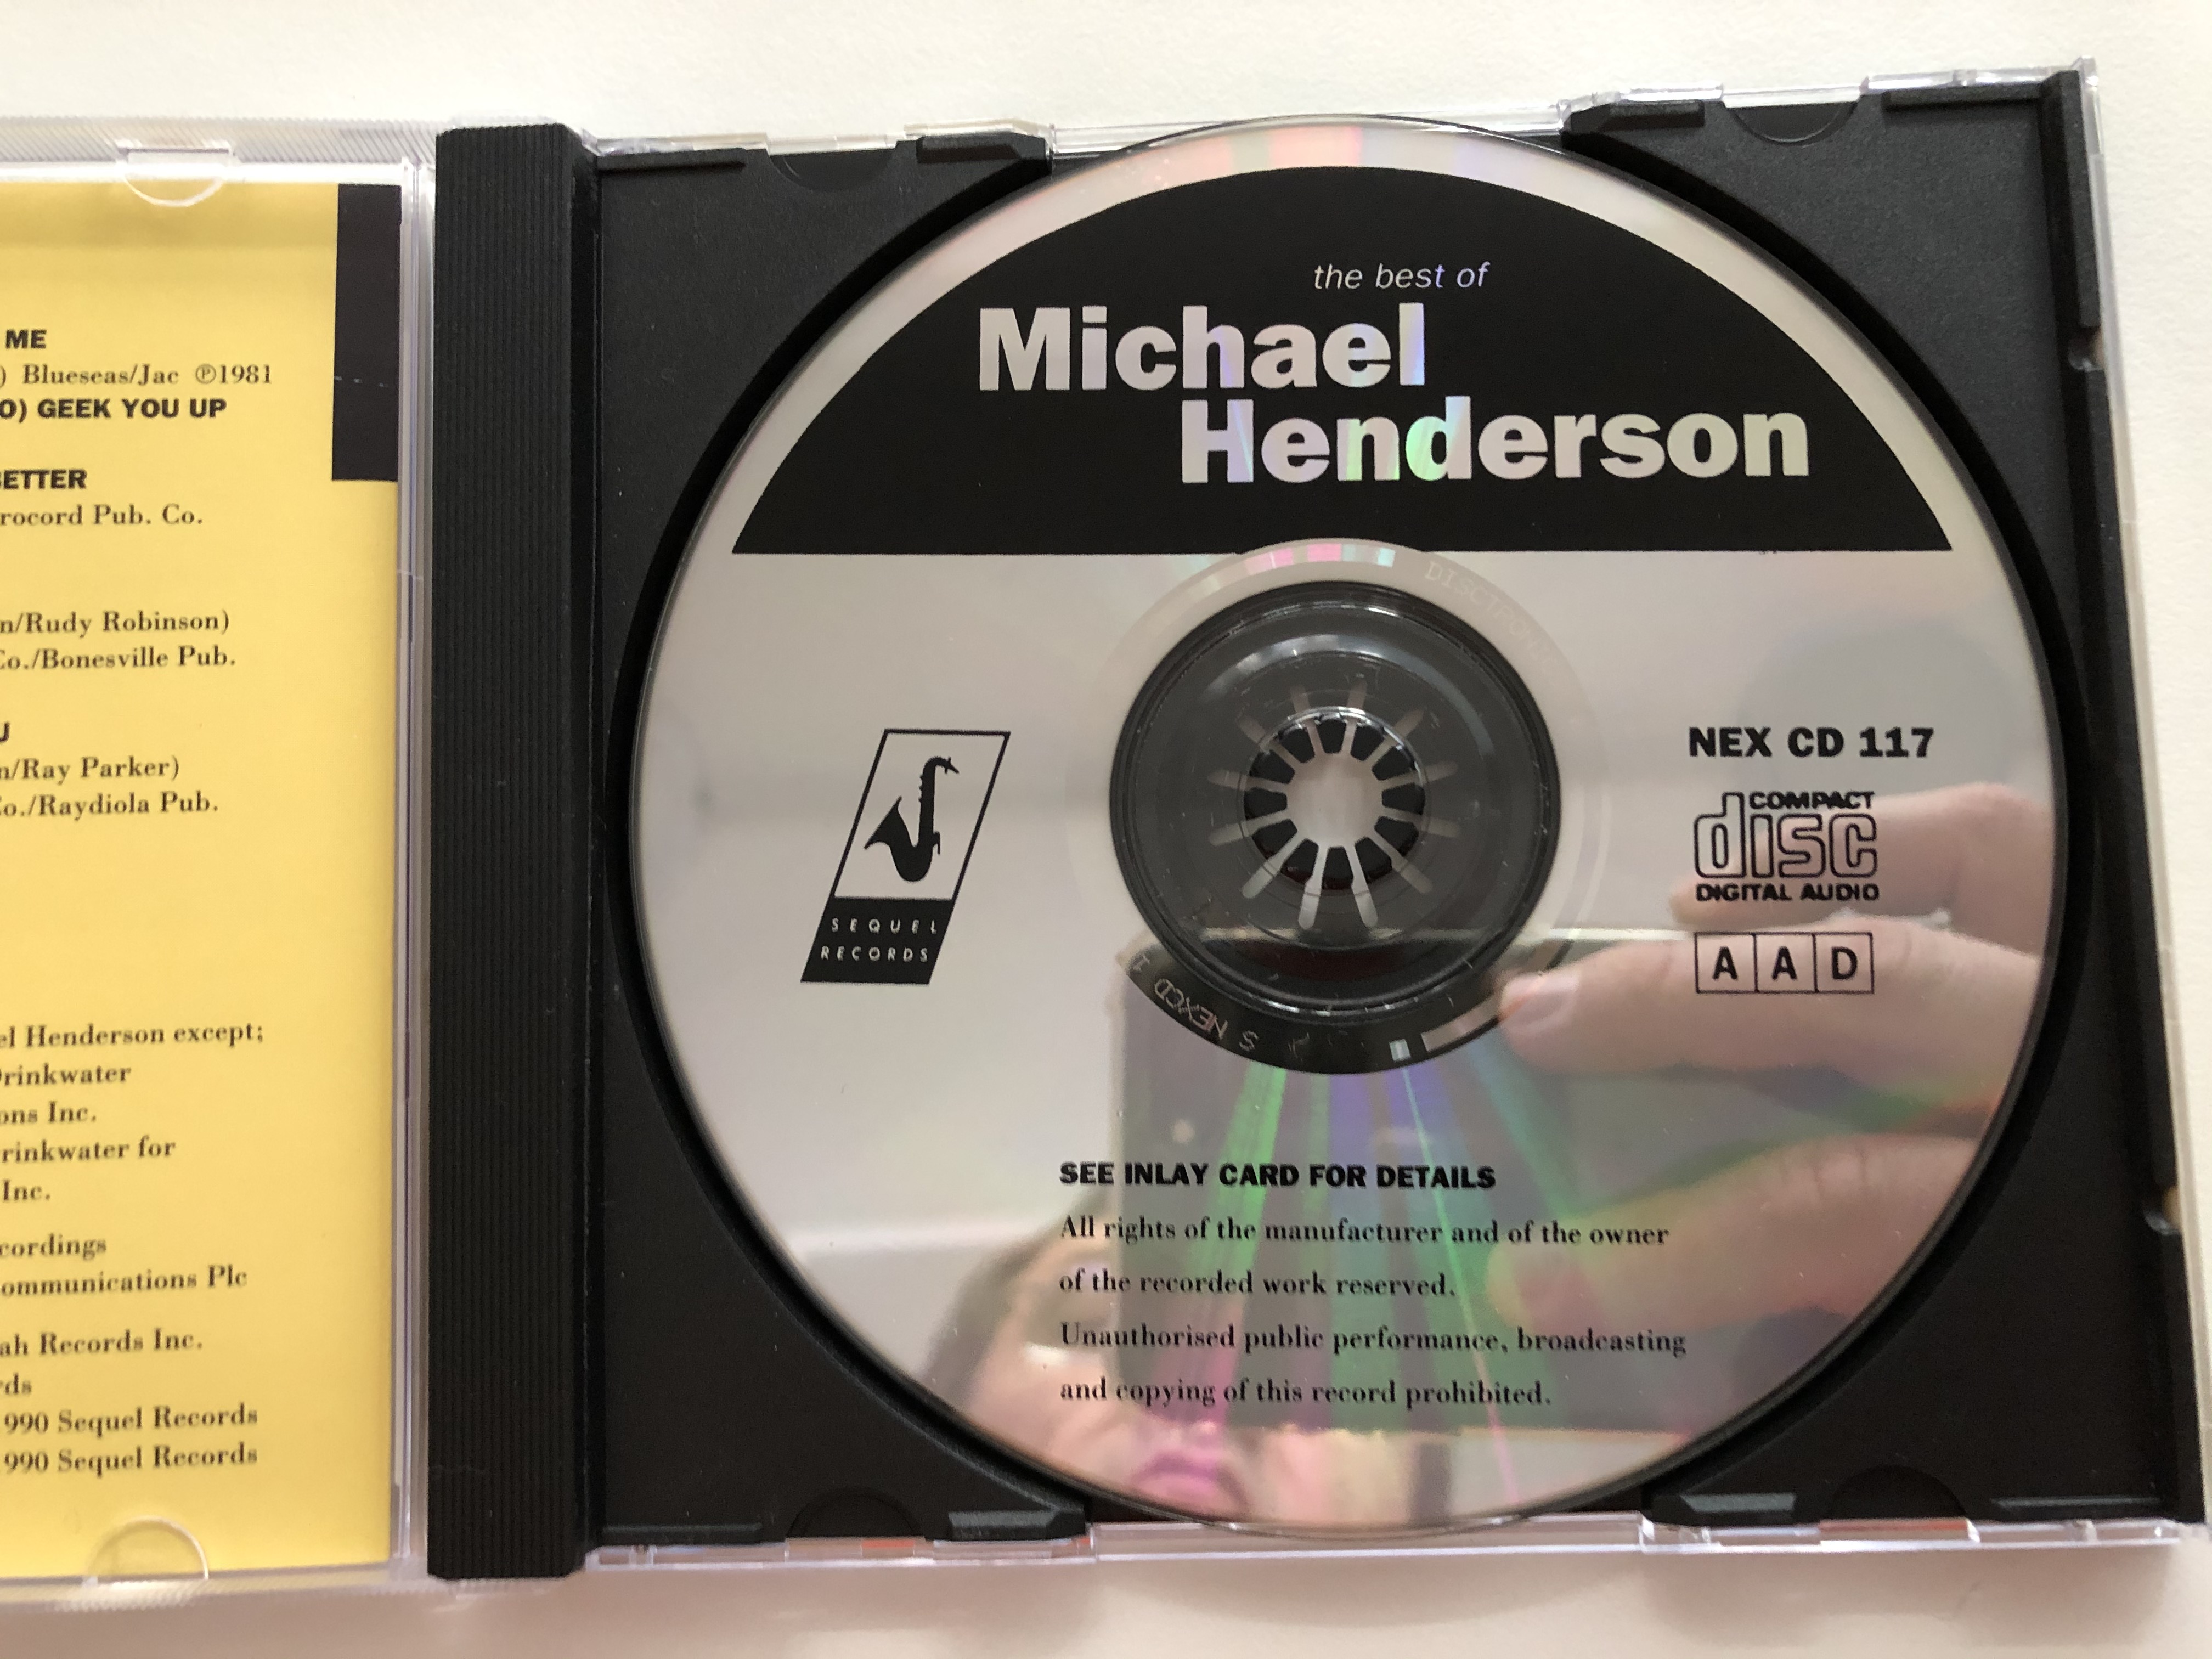 the-best-of-michael-henderson-featuring-jean-carn-phyllis-hyman-the-buddah-collection-sequel-records-audio-cd-1990-nex-cd-117-3-.jpg